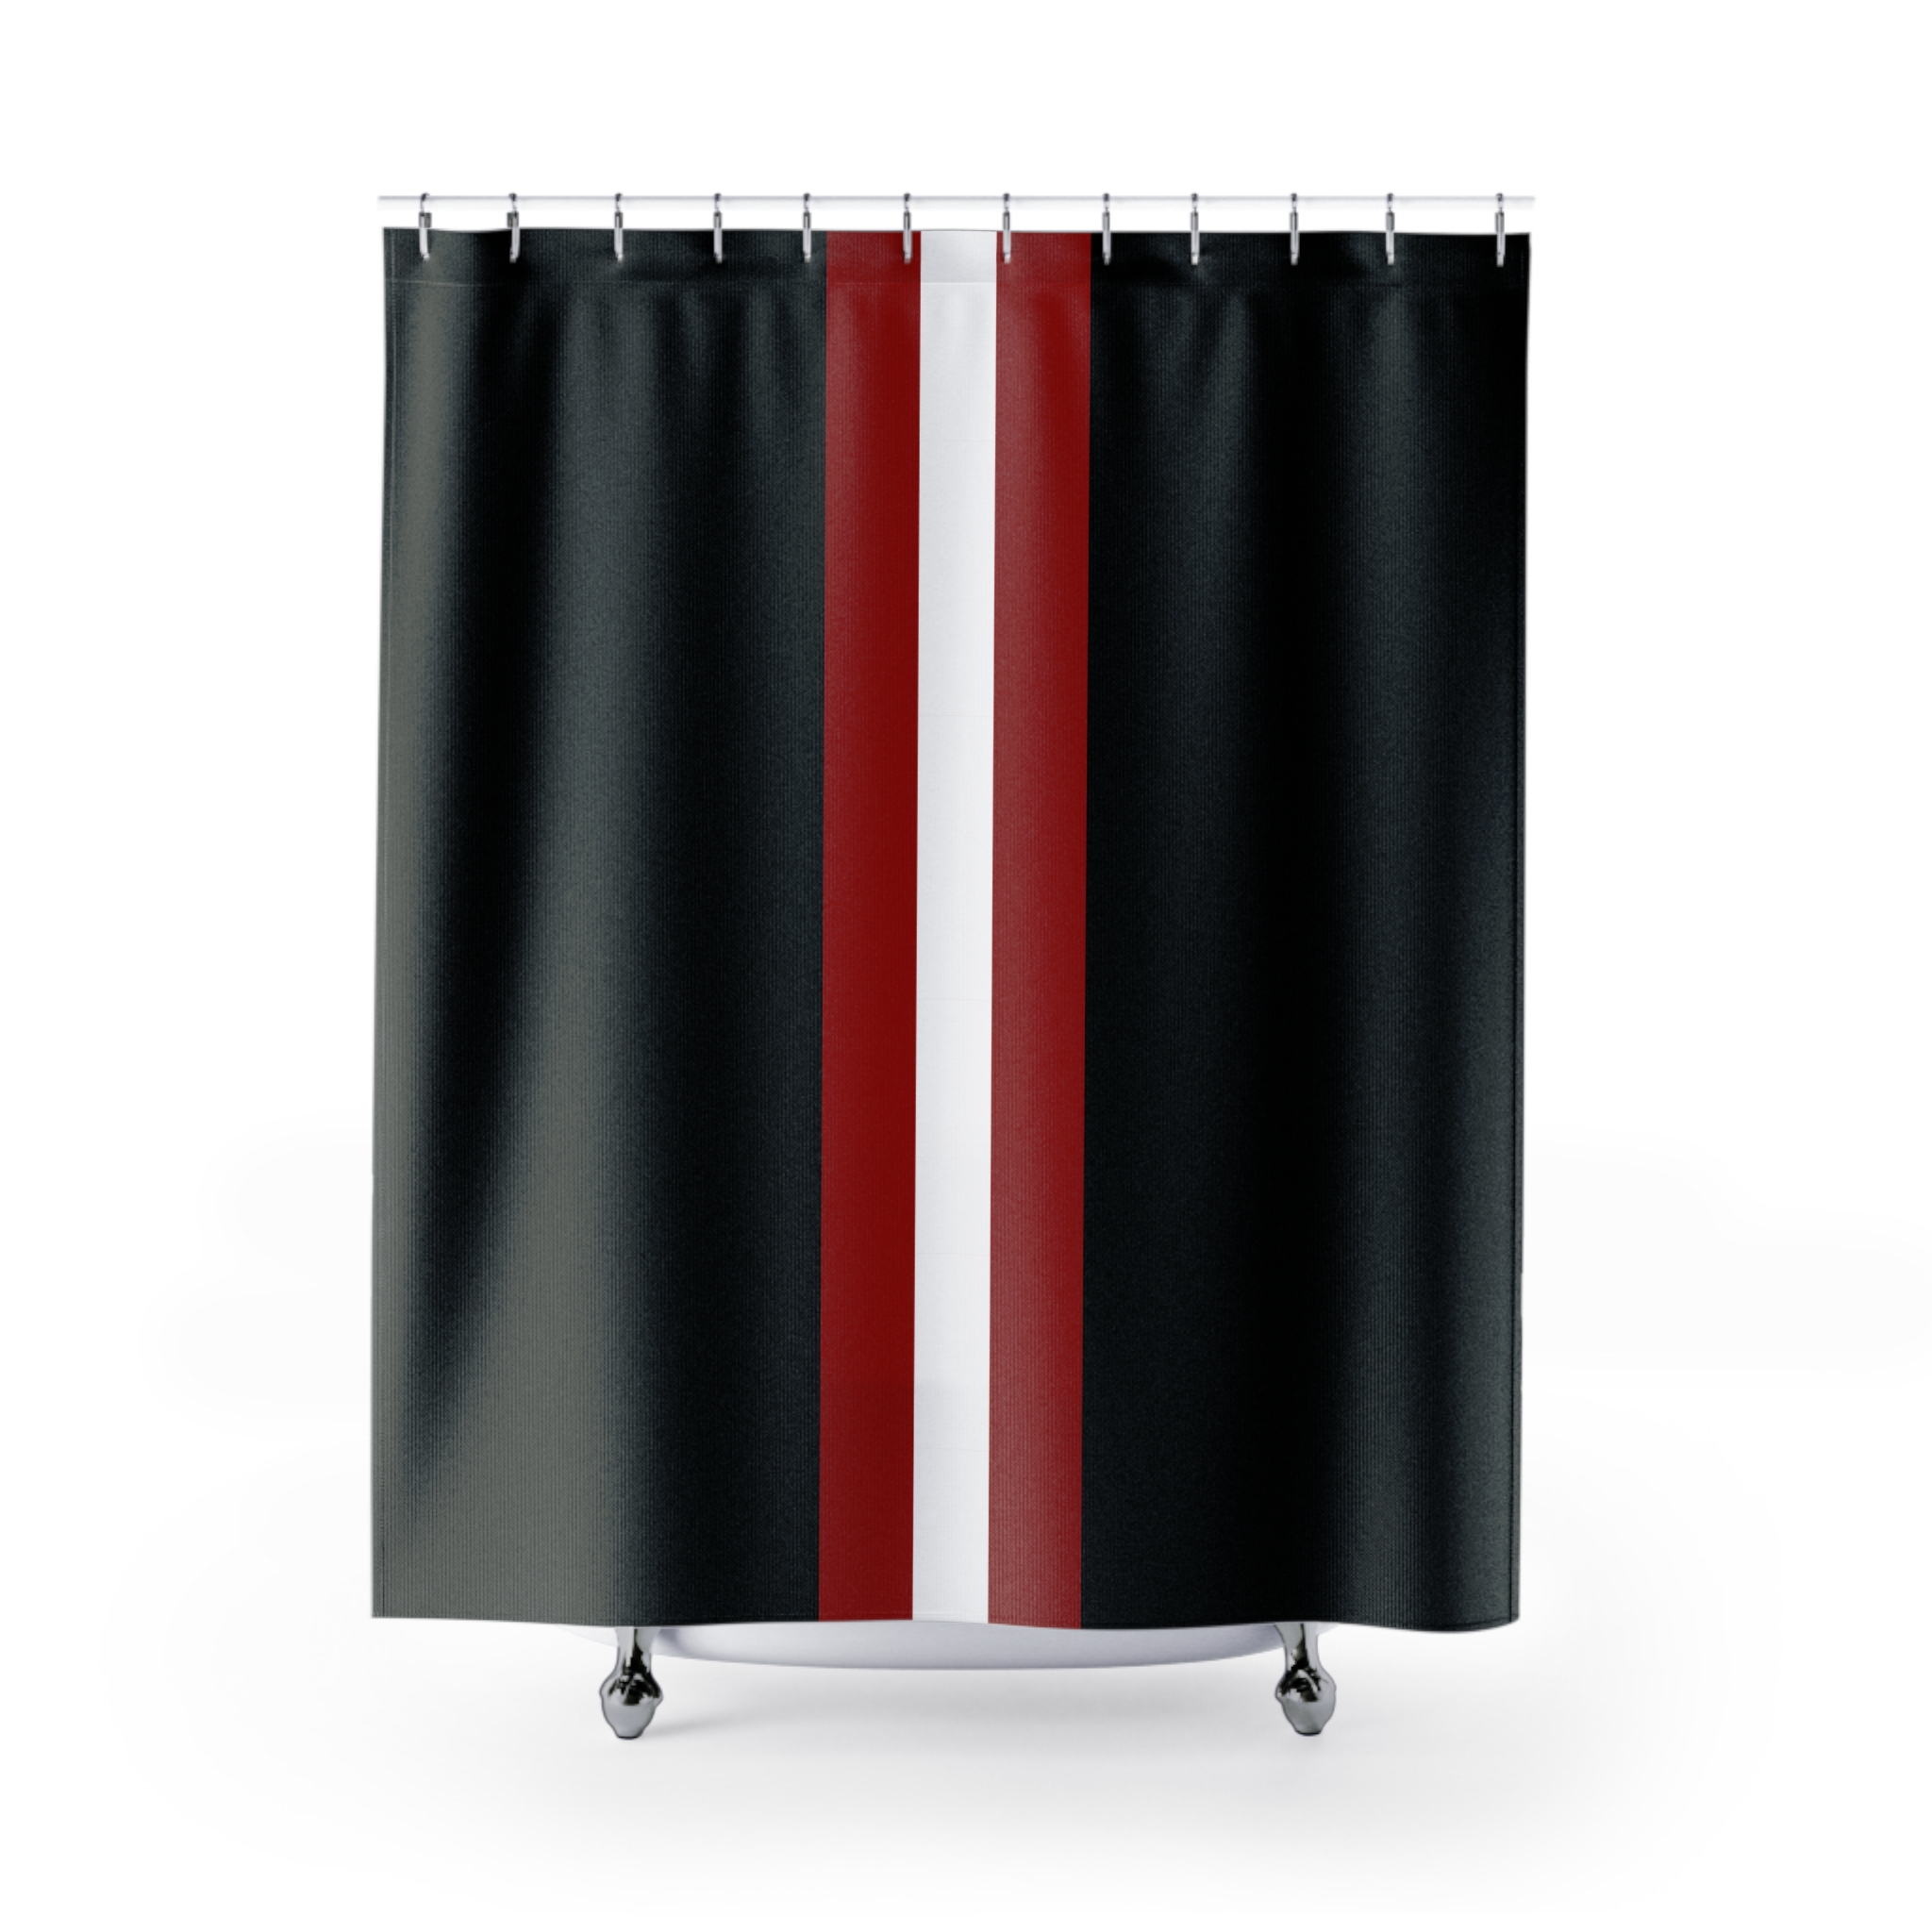 AD Shower Curtain